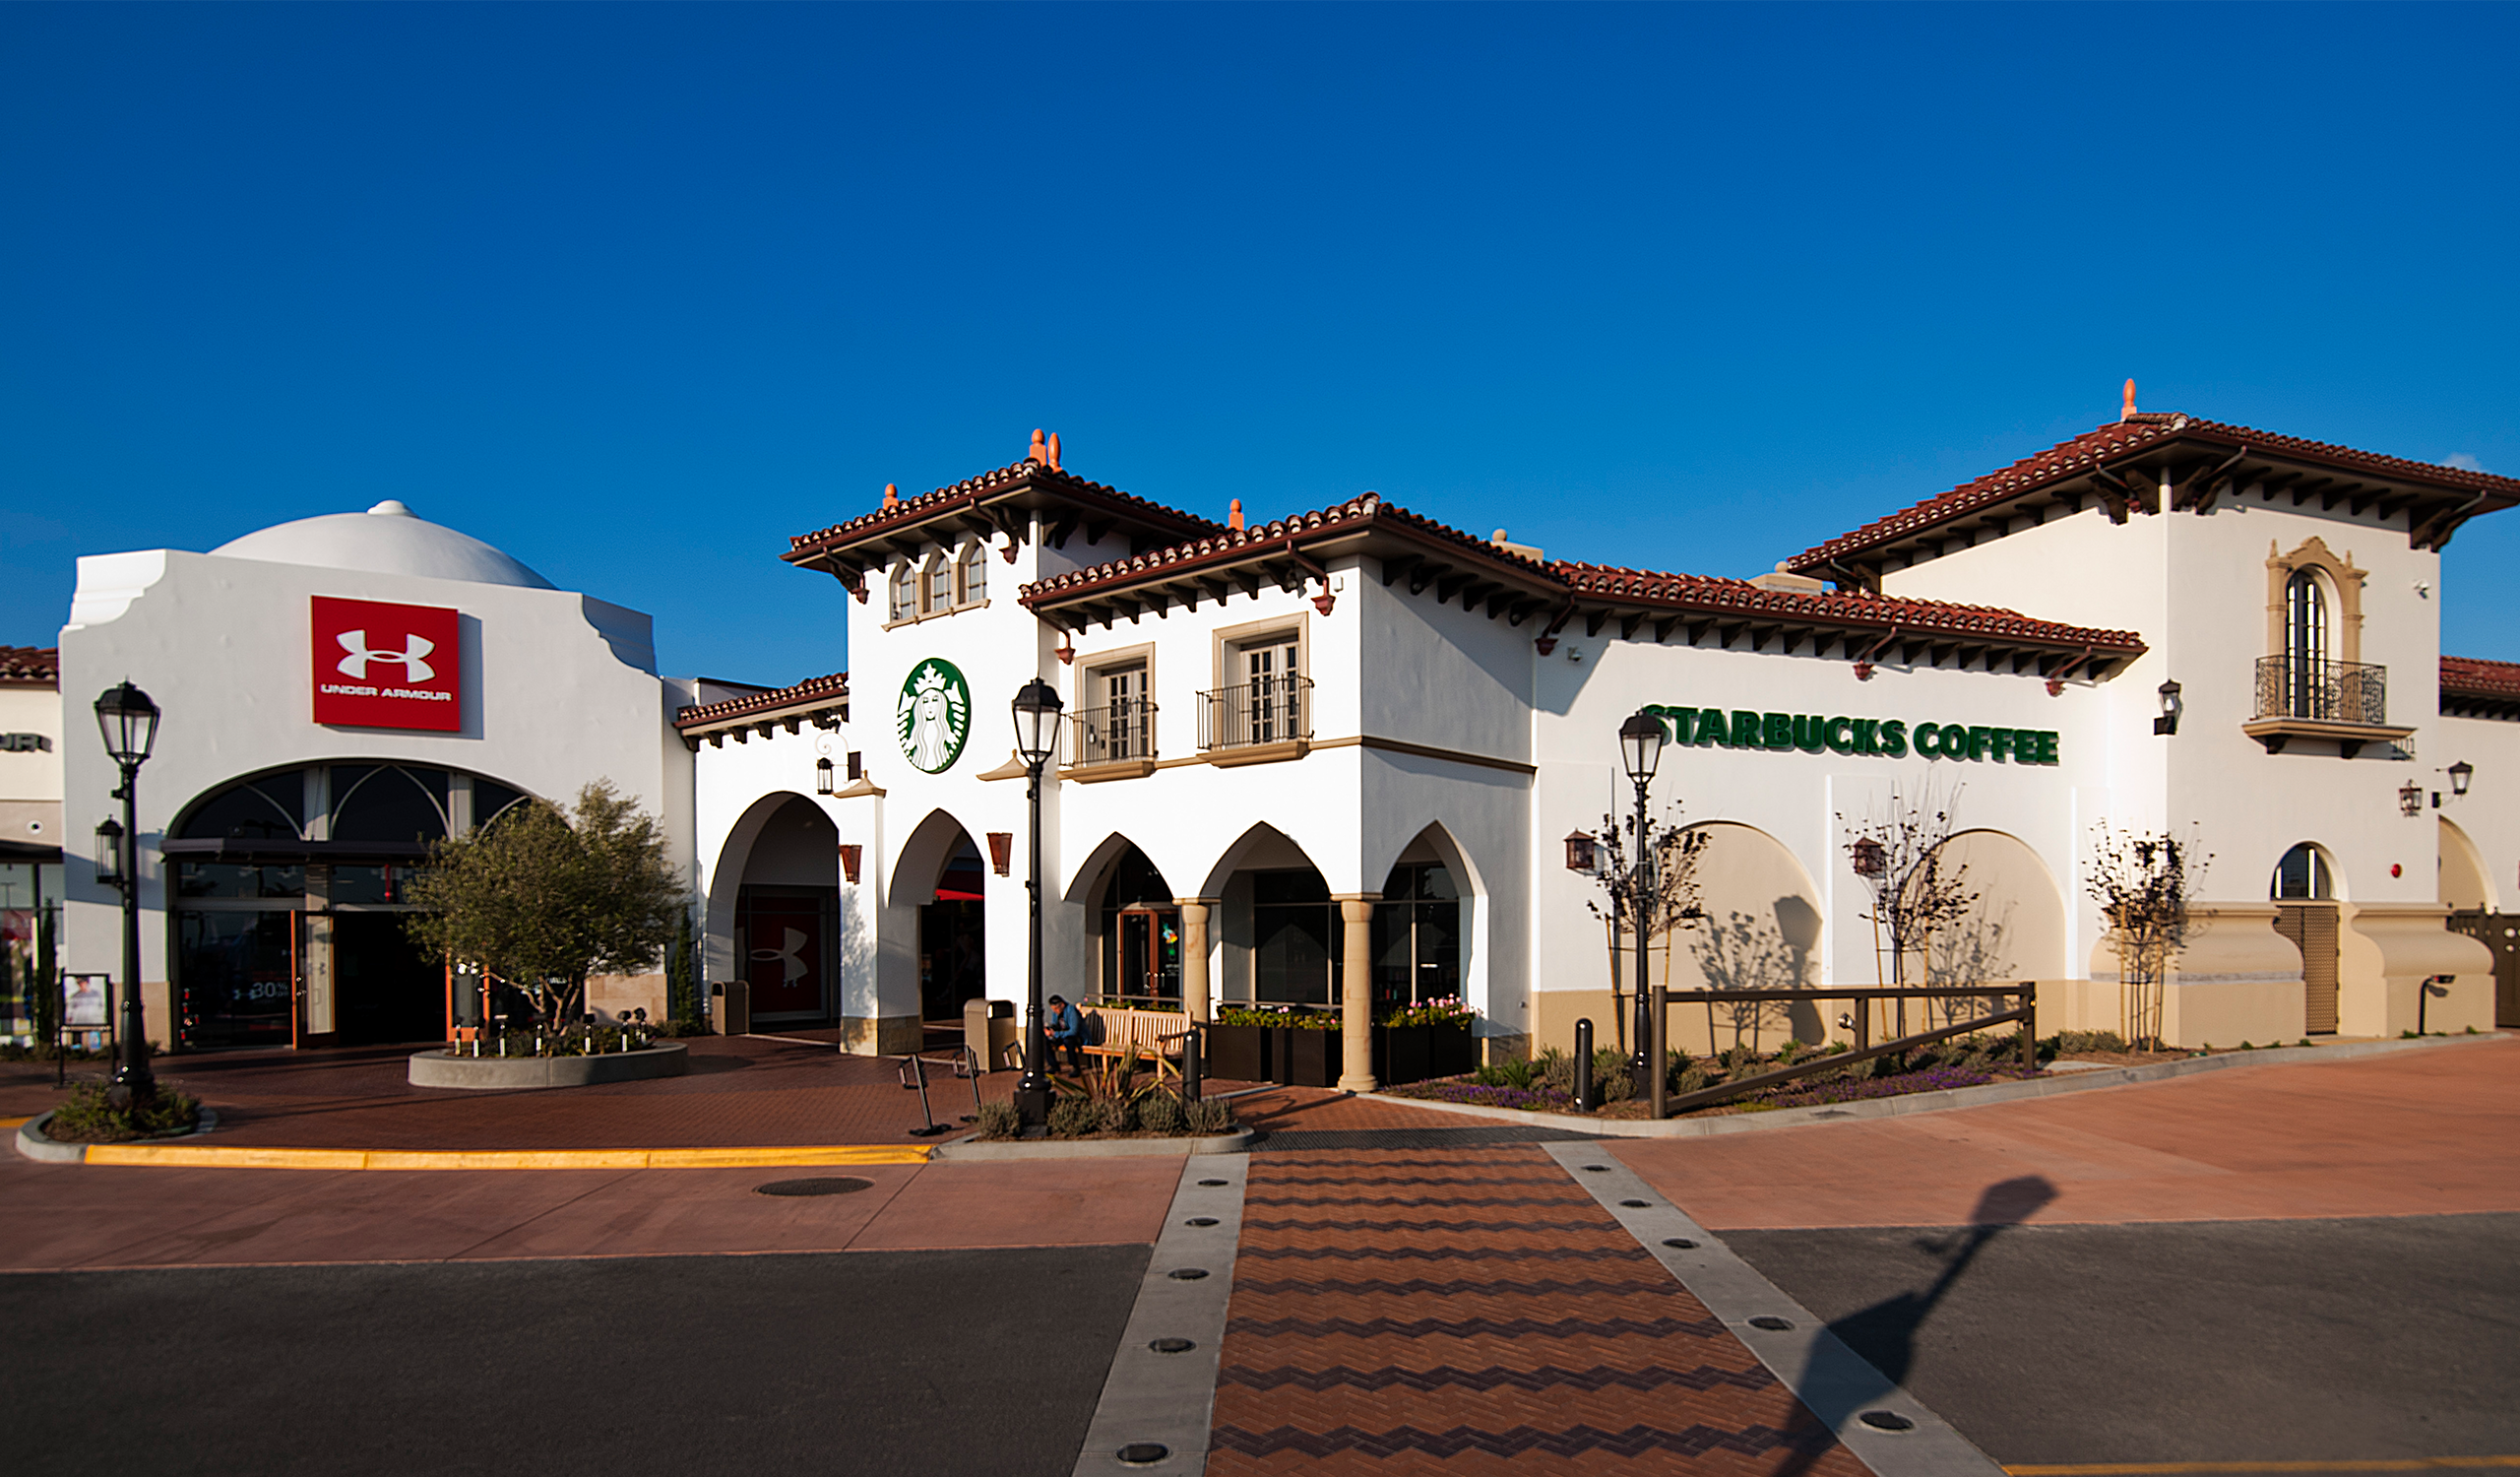 Exterior wide angle view of Outlets at San Clemente